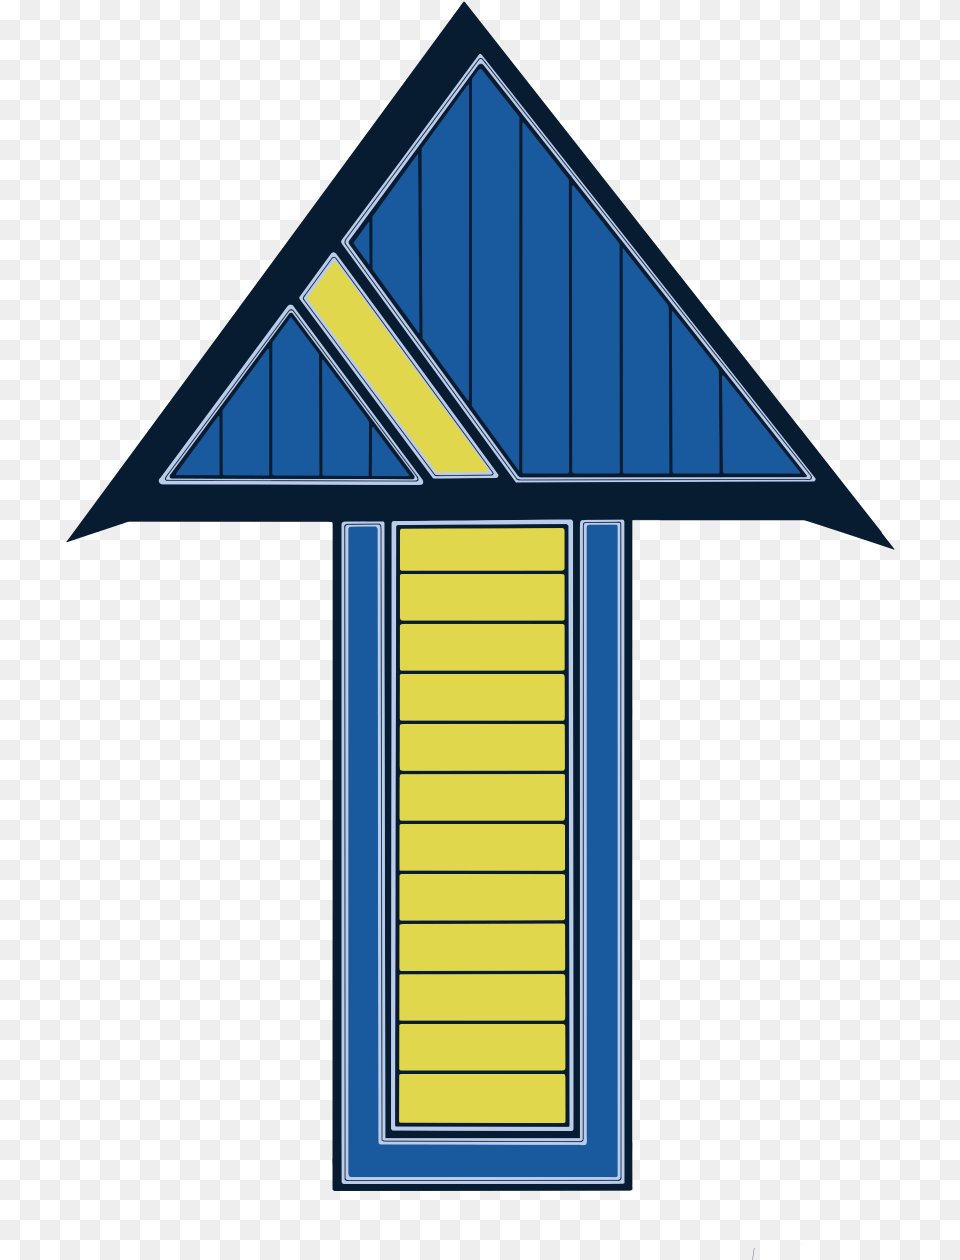 Clip Art, Architecture, Symbol, Shelter, Outdoors Png Image